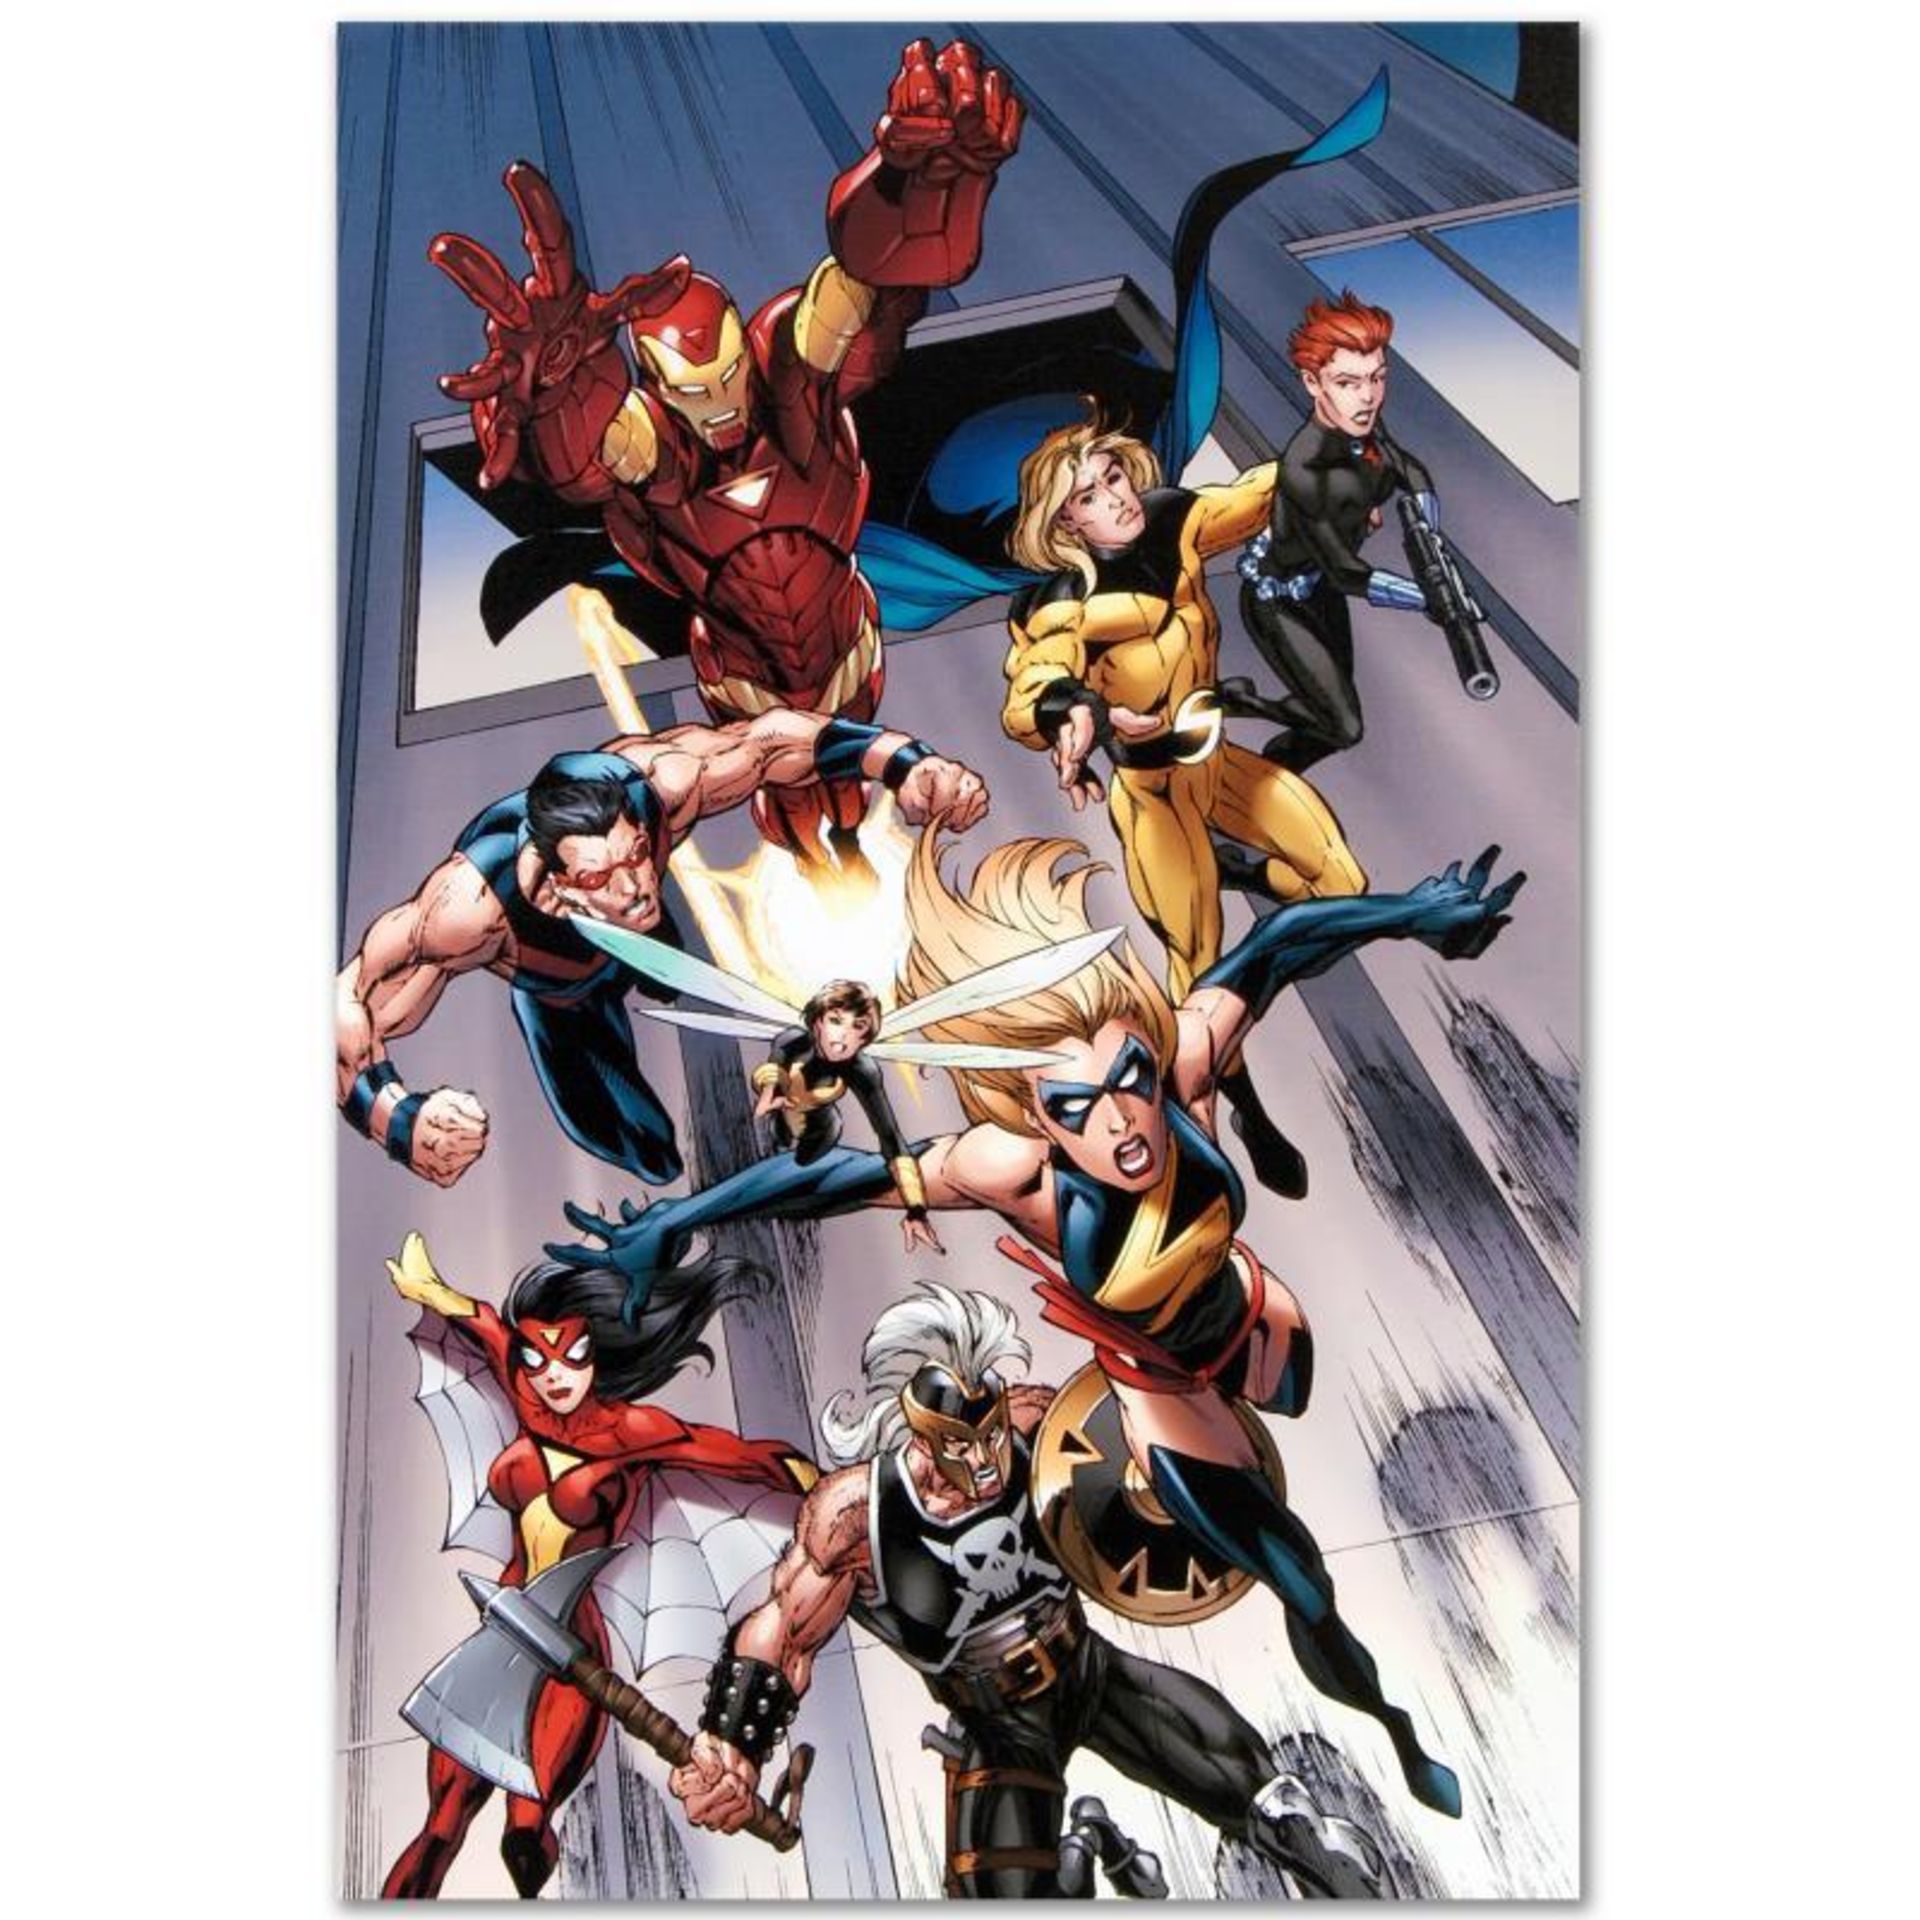 Marvel Comics "The Mighty Avengers #7" Numbered Limited Edition Giclee on Canvas